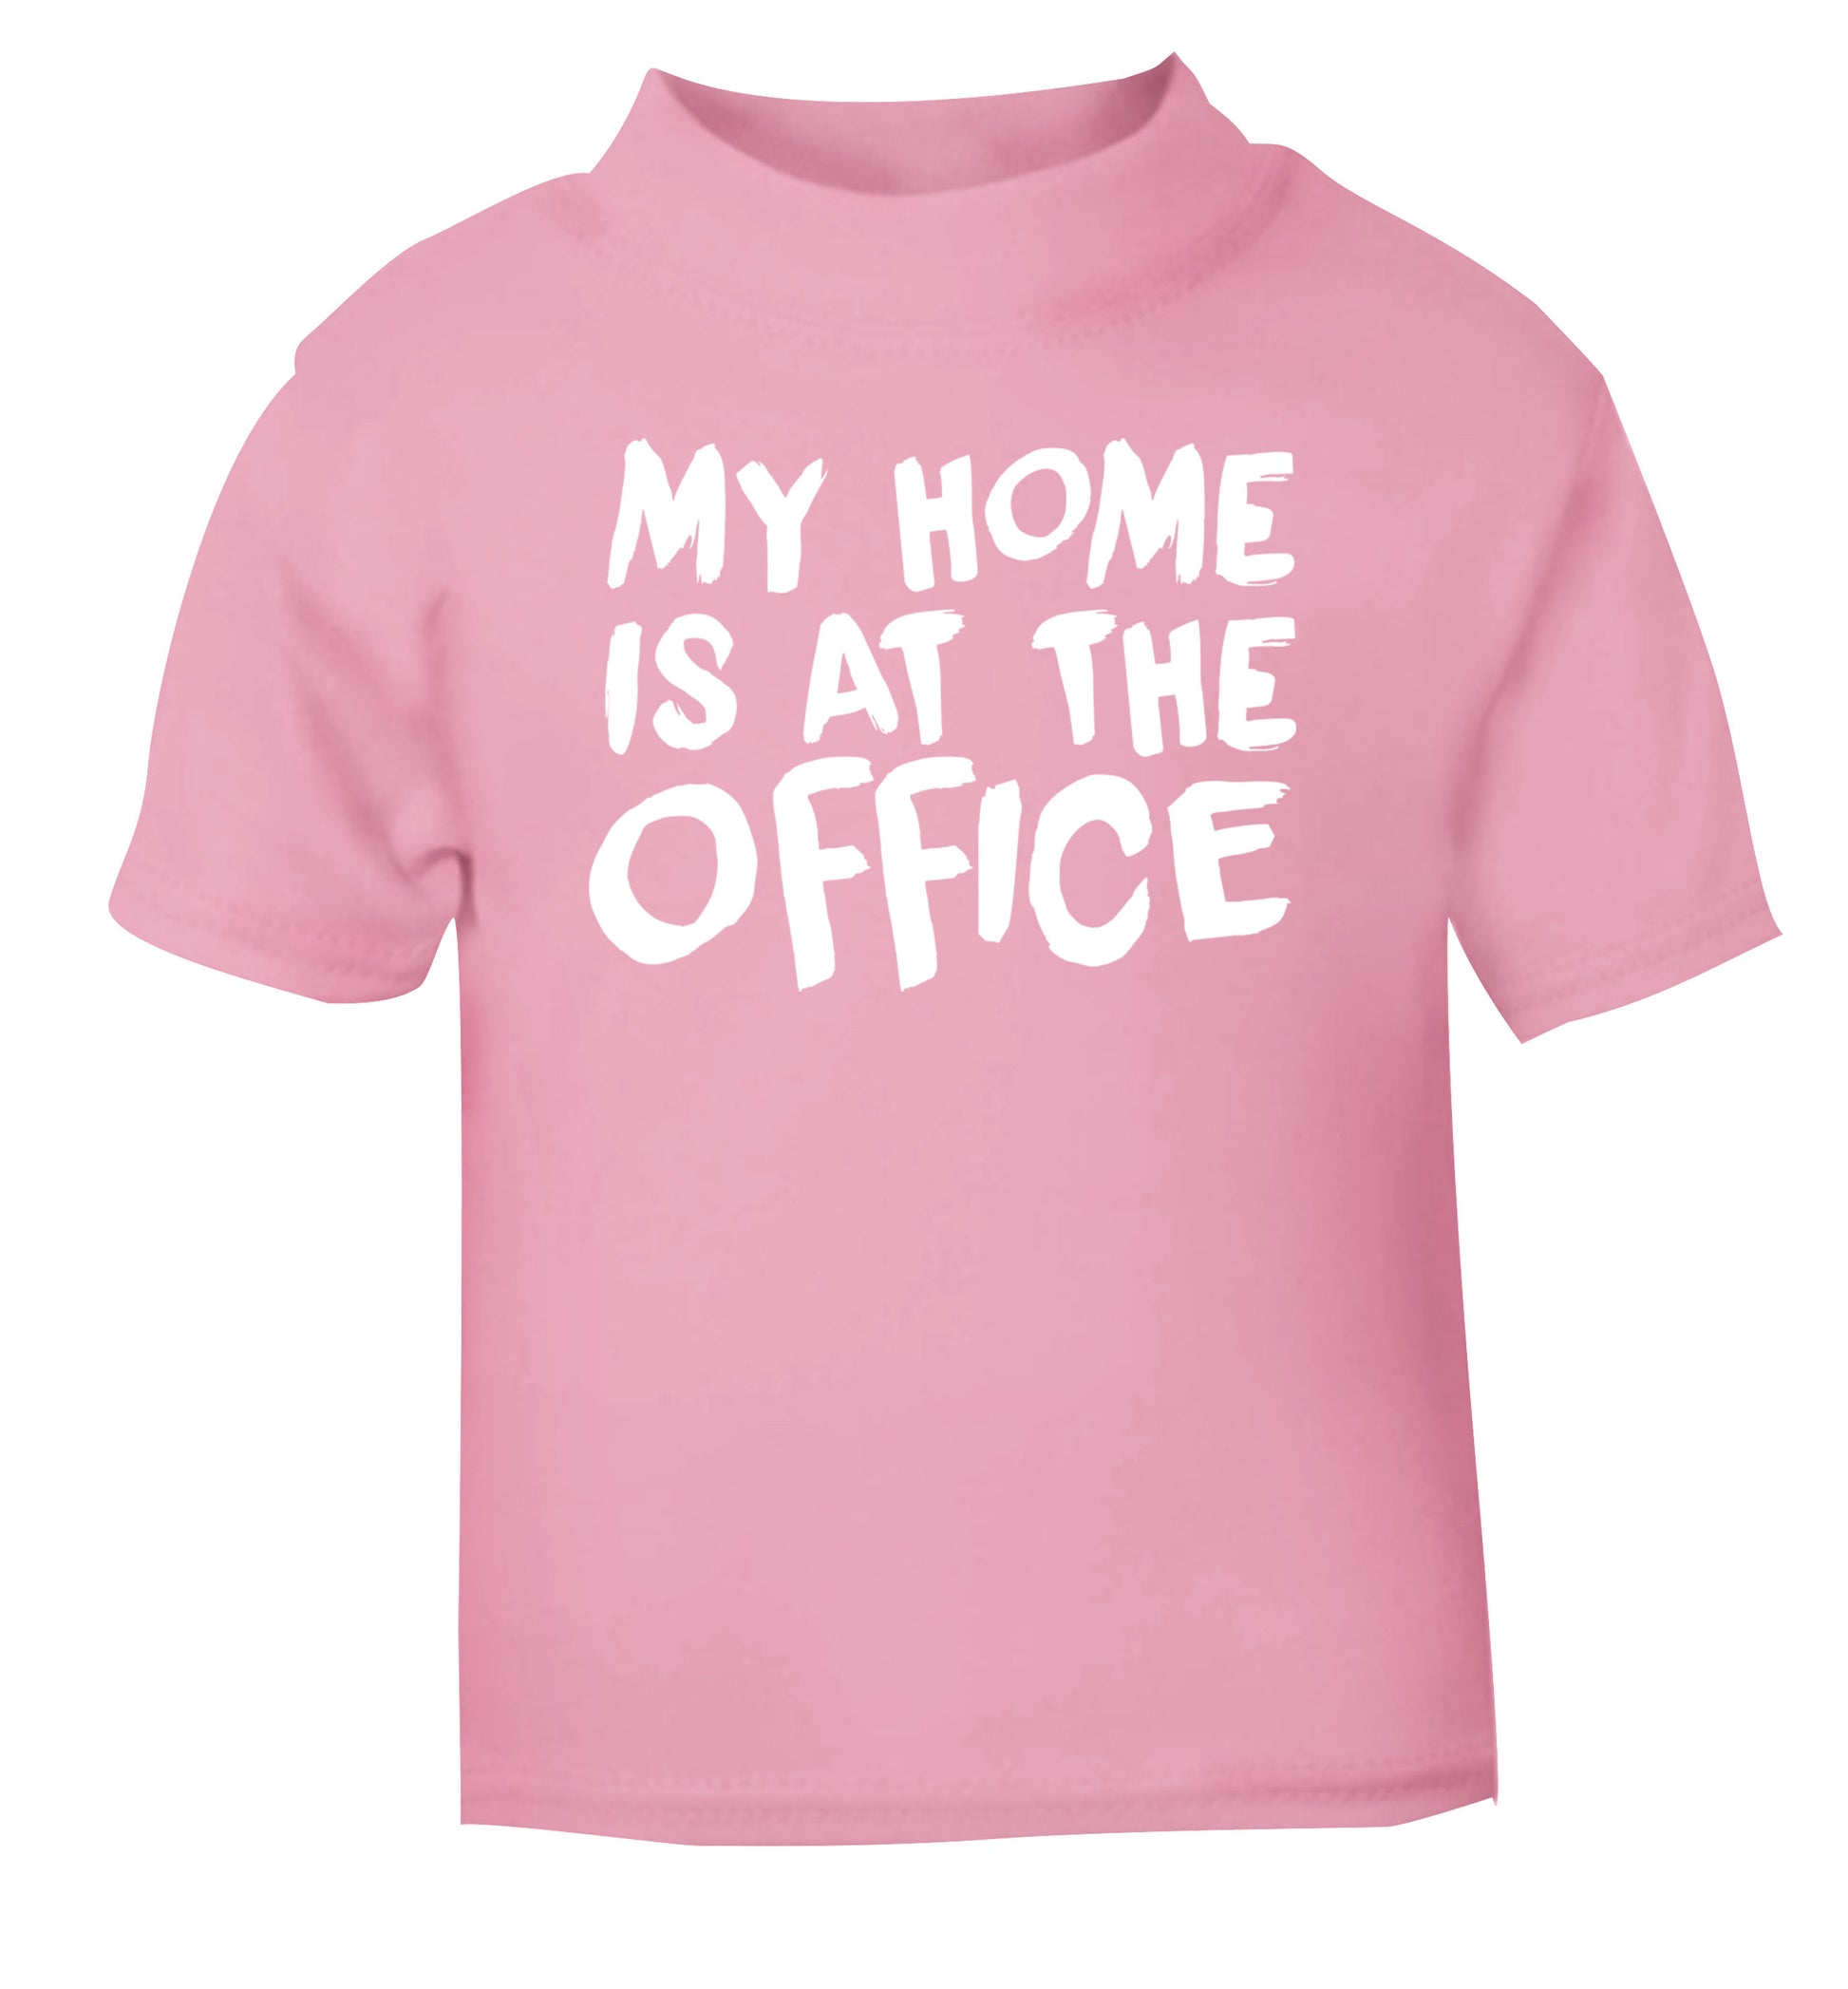 My home is at the office light pink Baby Toddler Tshirt 2 Years